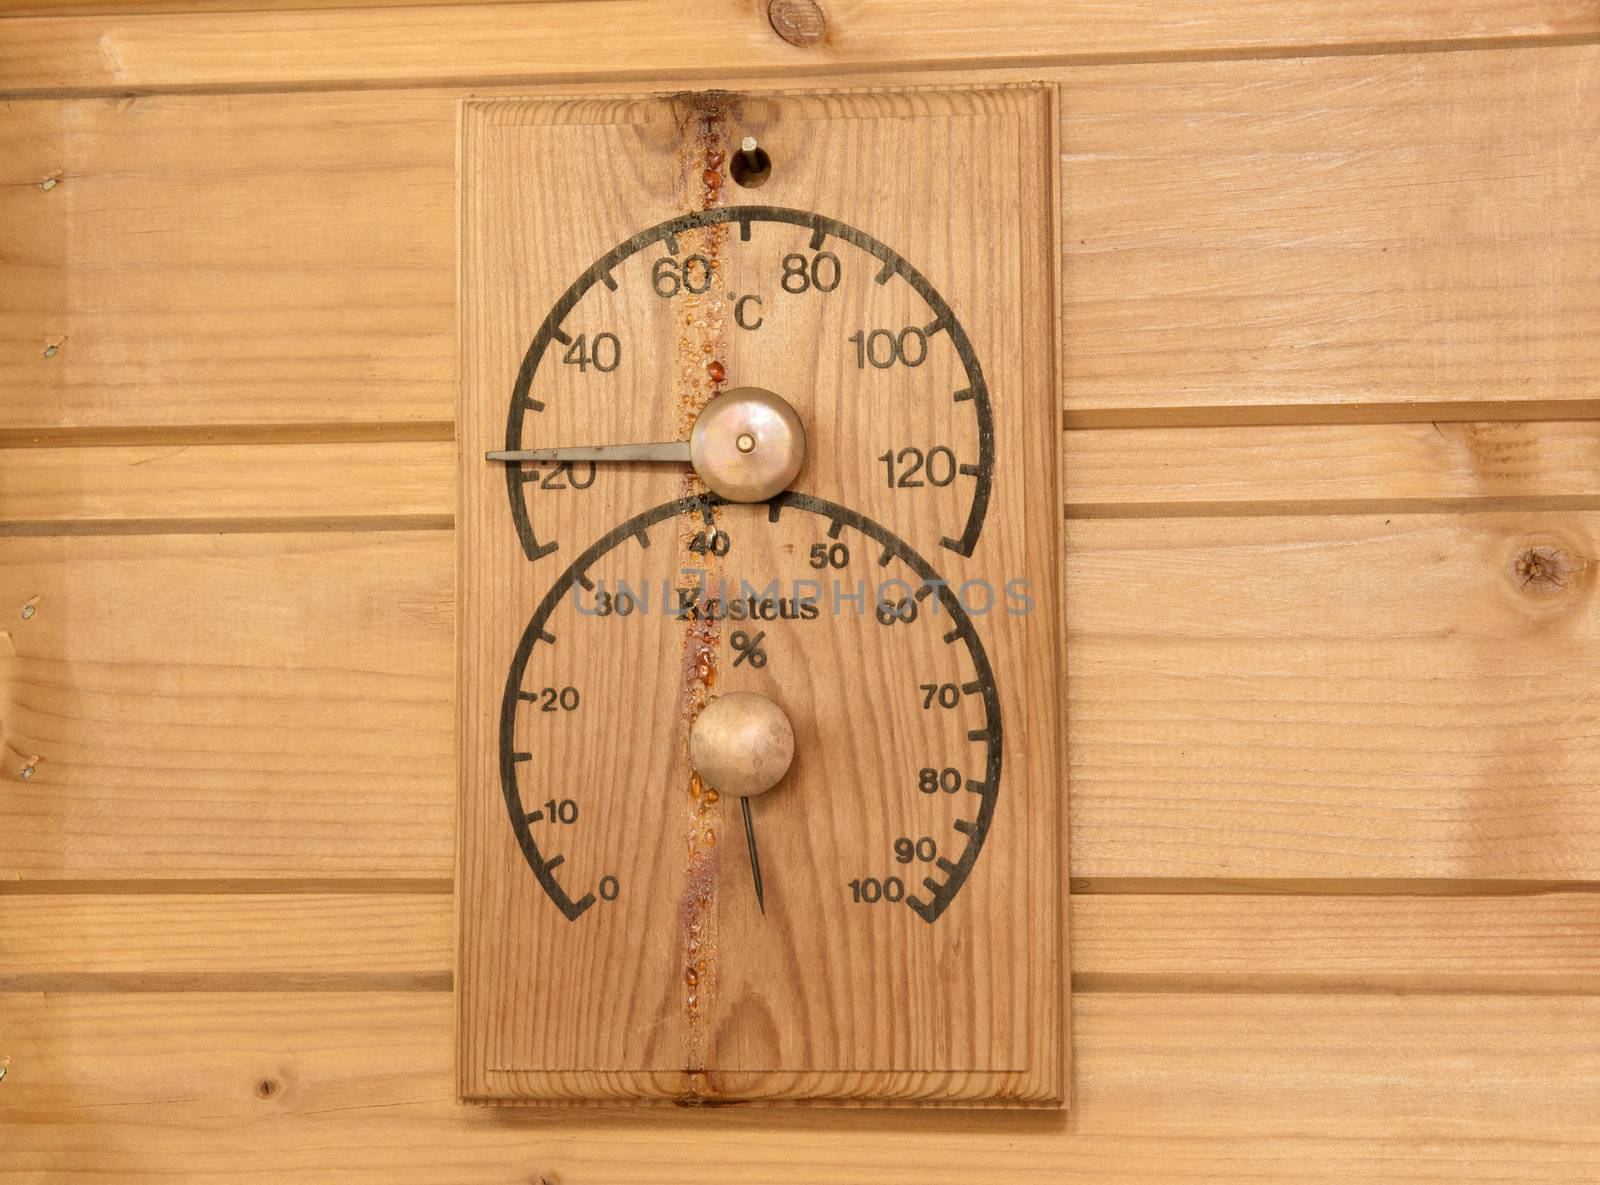 The thermometer and the humidity measuring instrument in the Finnish sauna